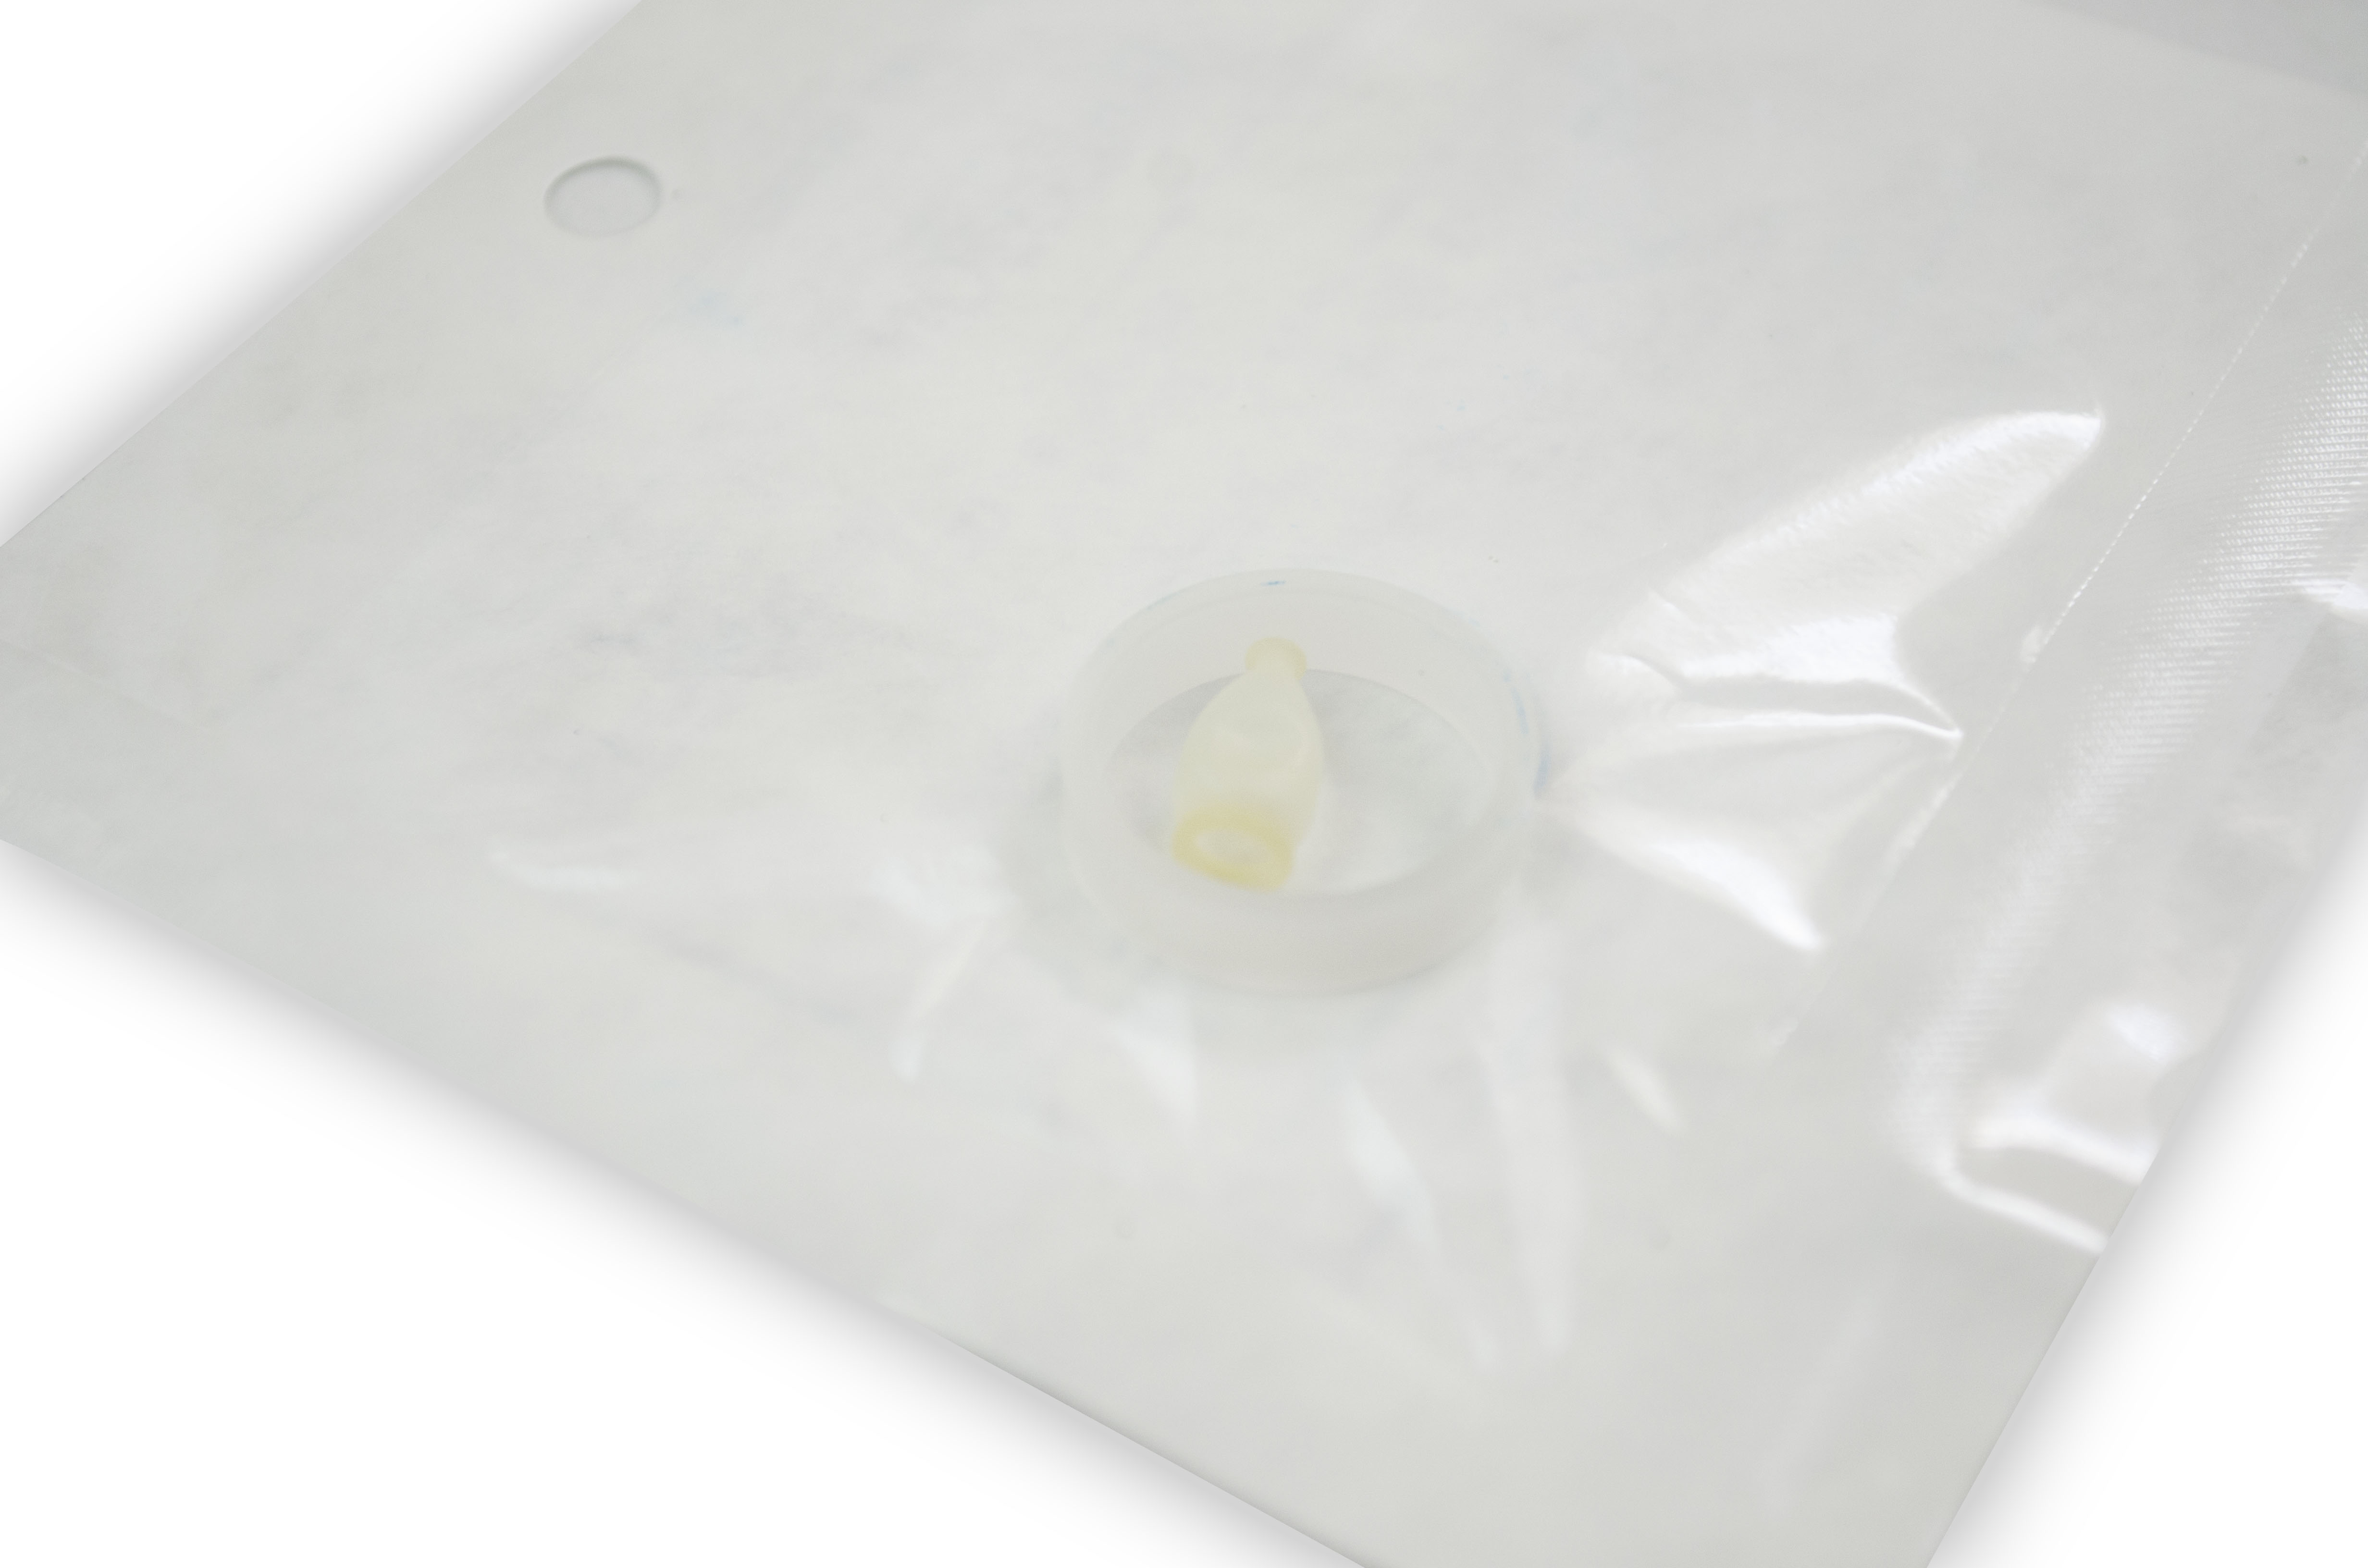 [In-Date] Olympus Disposable Balloon (Each) - MAJ-1351: For Ultrasonic Bronchoscopes: BF-UC160F, BF-UC180F (sterile, contains latex) (Original Packaging)